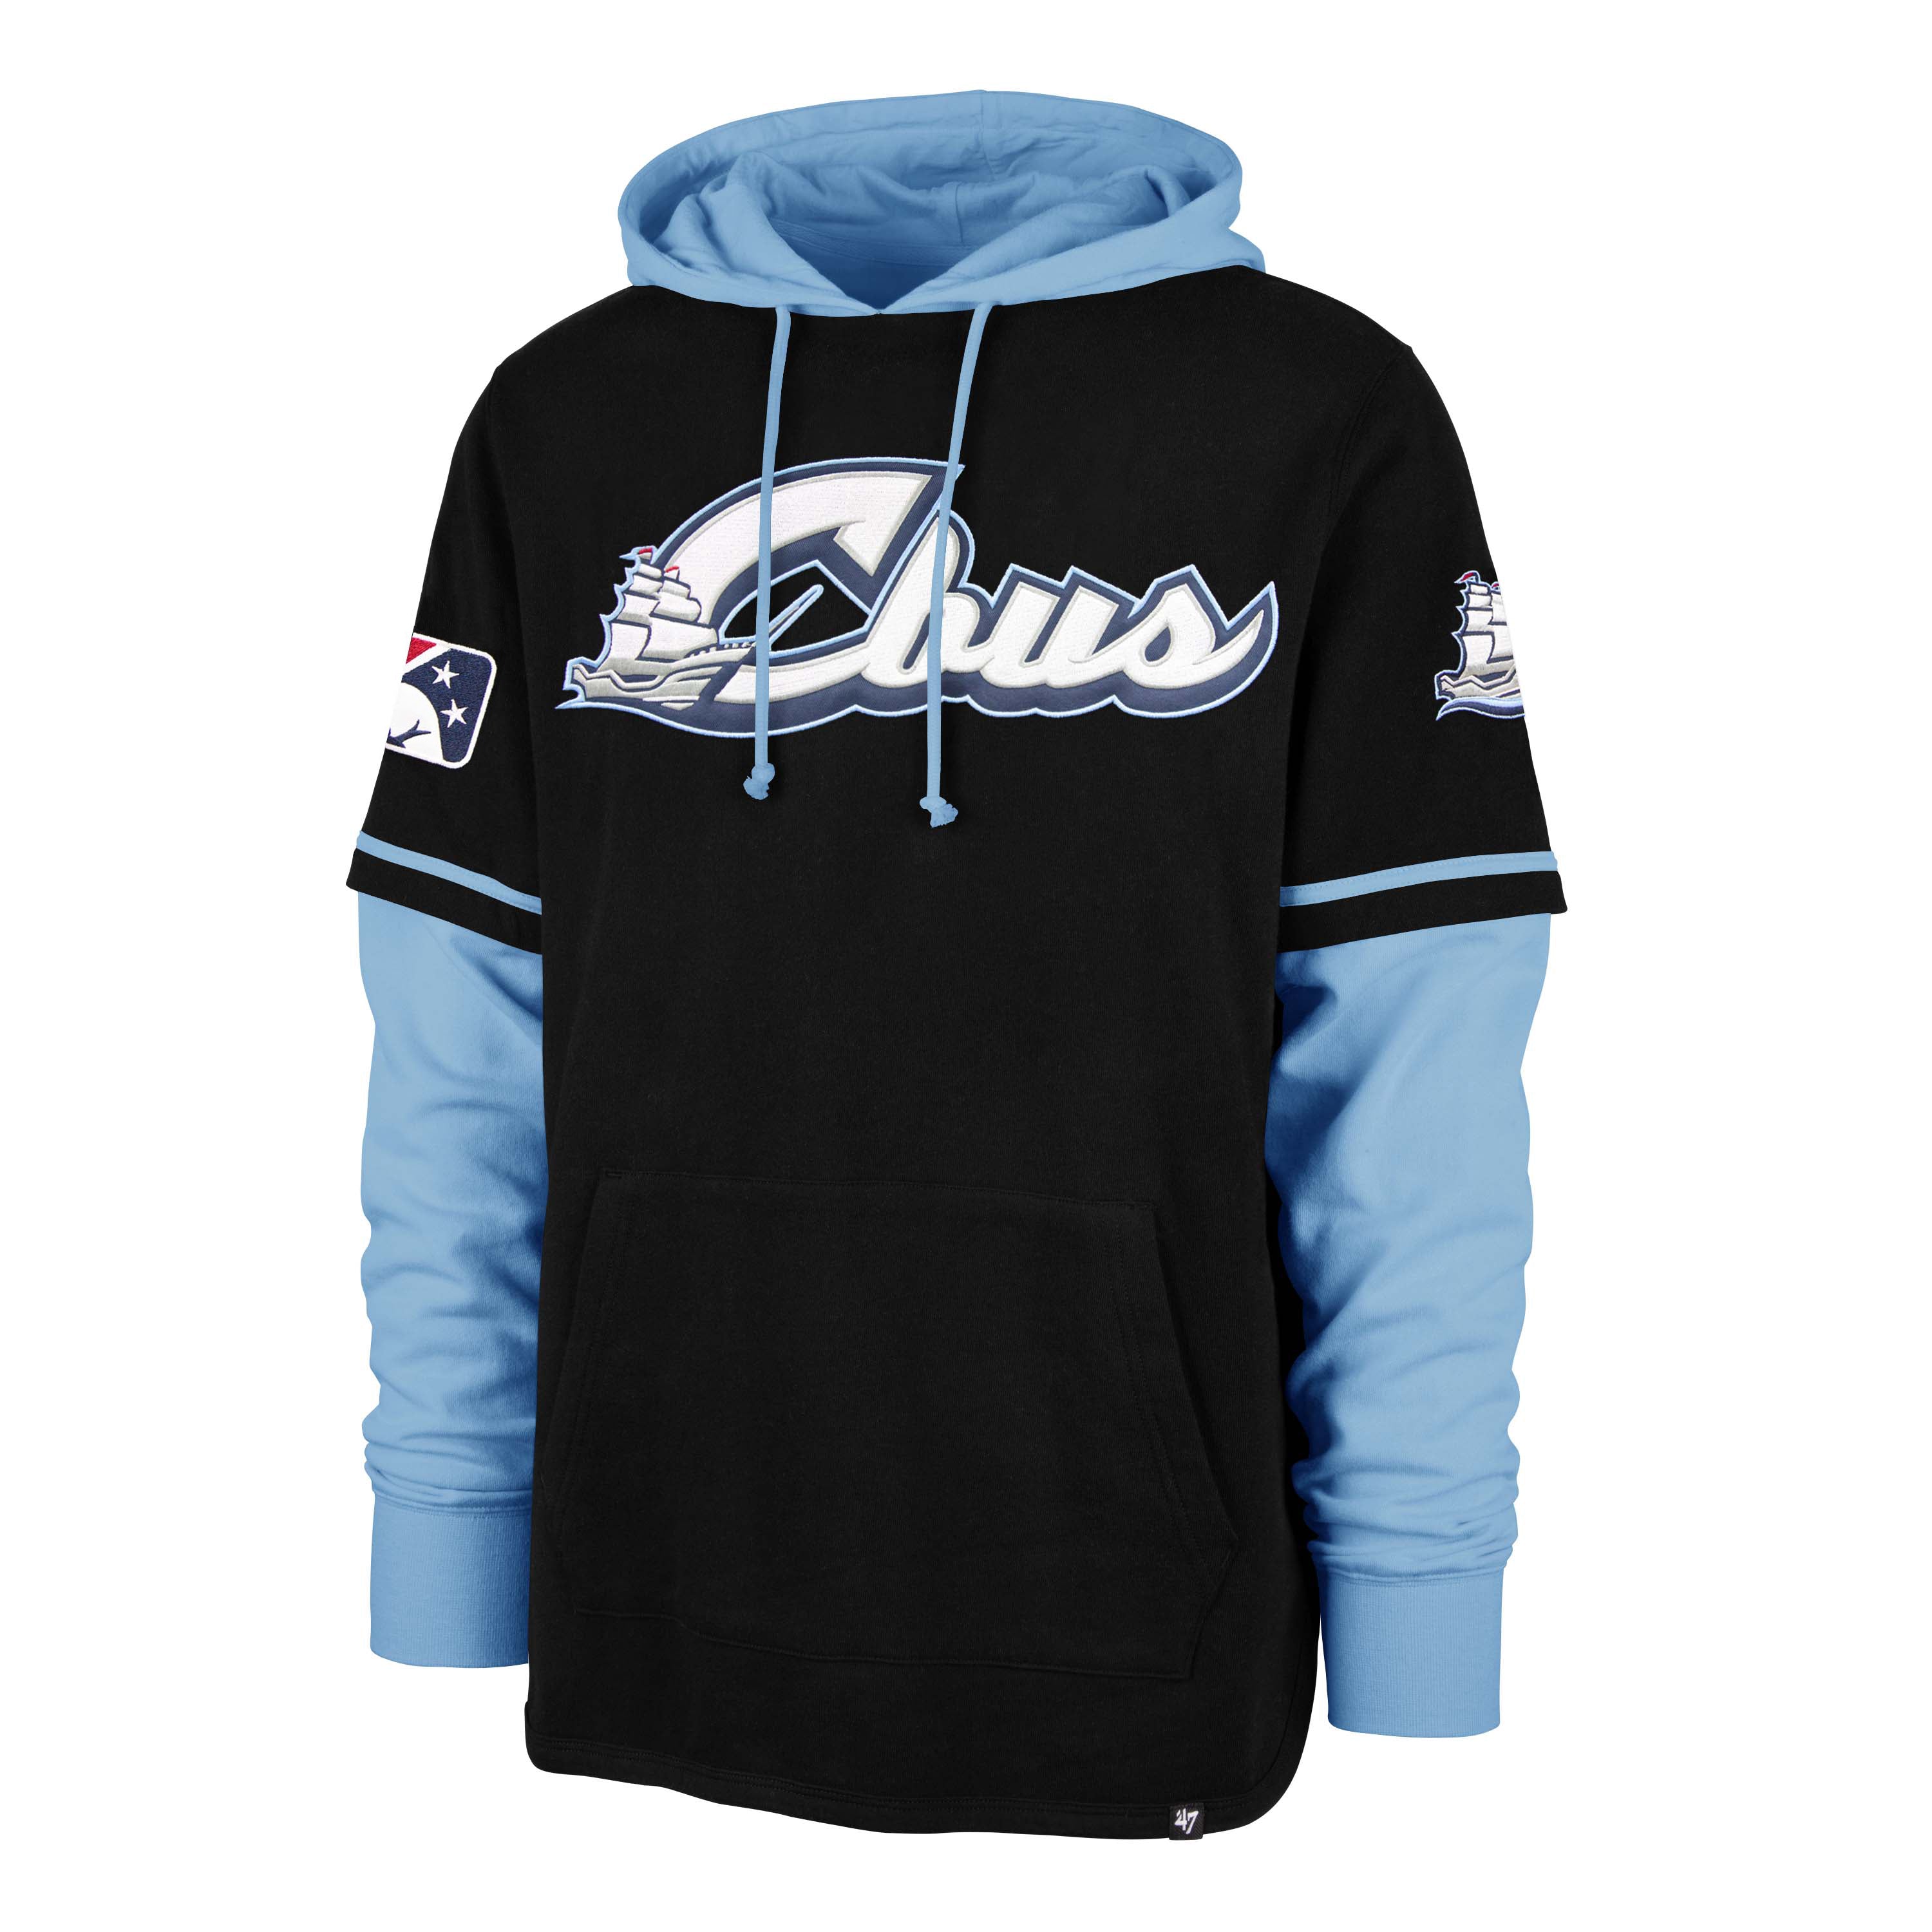 Columbus Clippers 47 Brand Trifecta Shortstop Pullover 